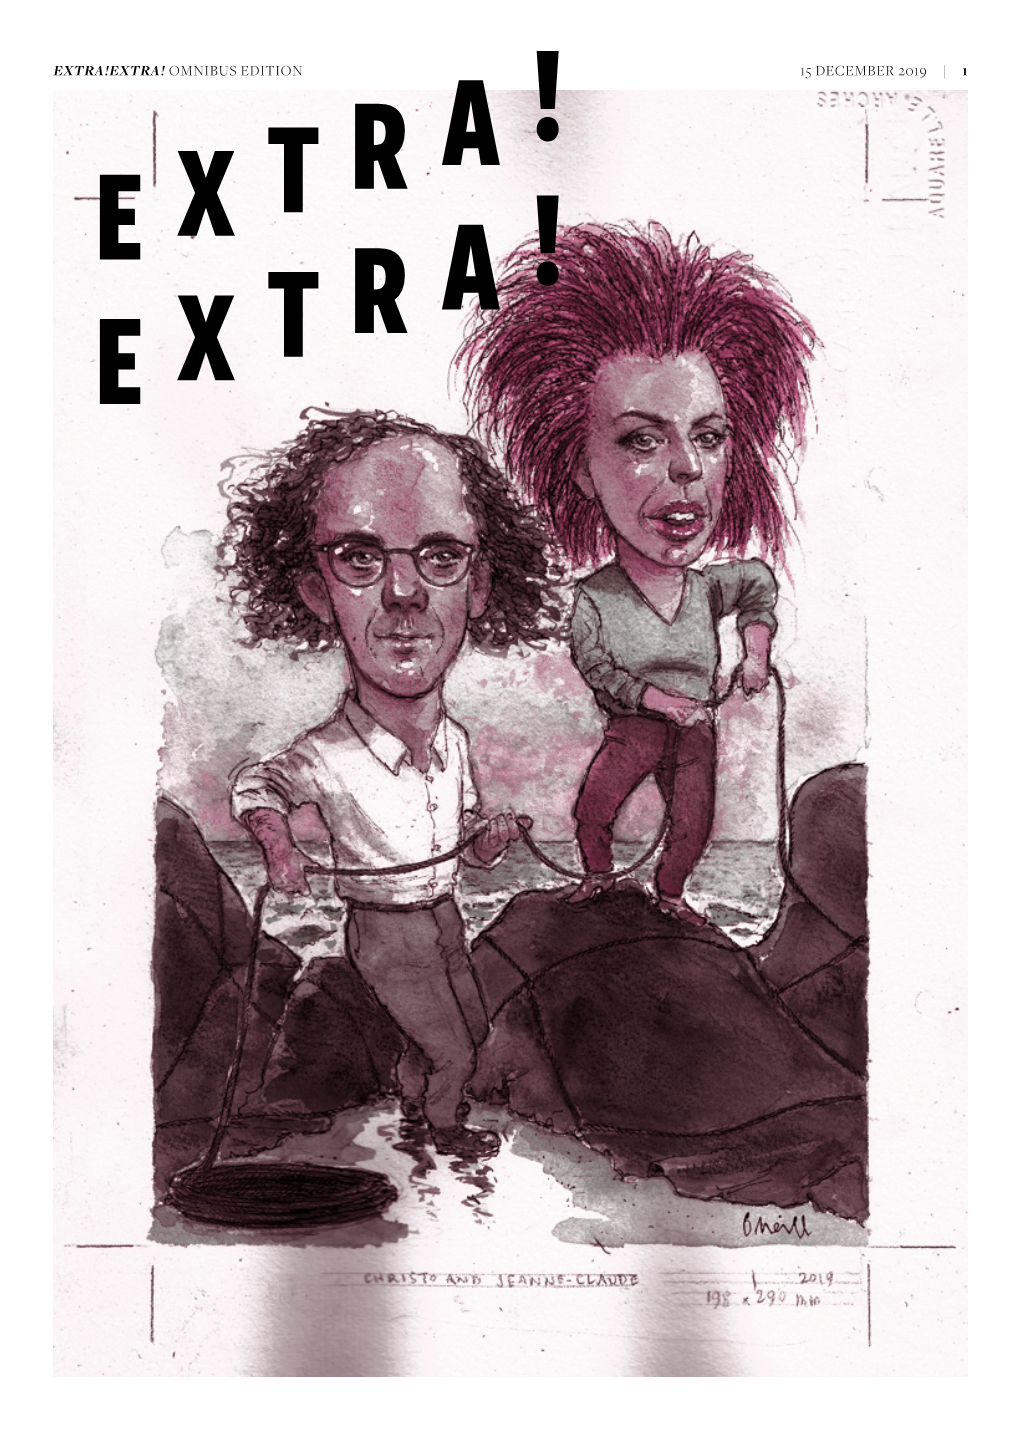 EXTRA!EXTRA! OMNIBUS EDITION 15 DECEMBER 2019 -…In Which Lucas Ihlein, the Rizzeria and Collaborators Publish a Weekly Newspaper at the Art Gallery of NSW…